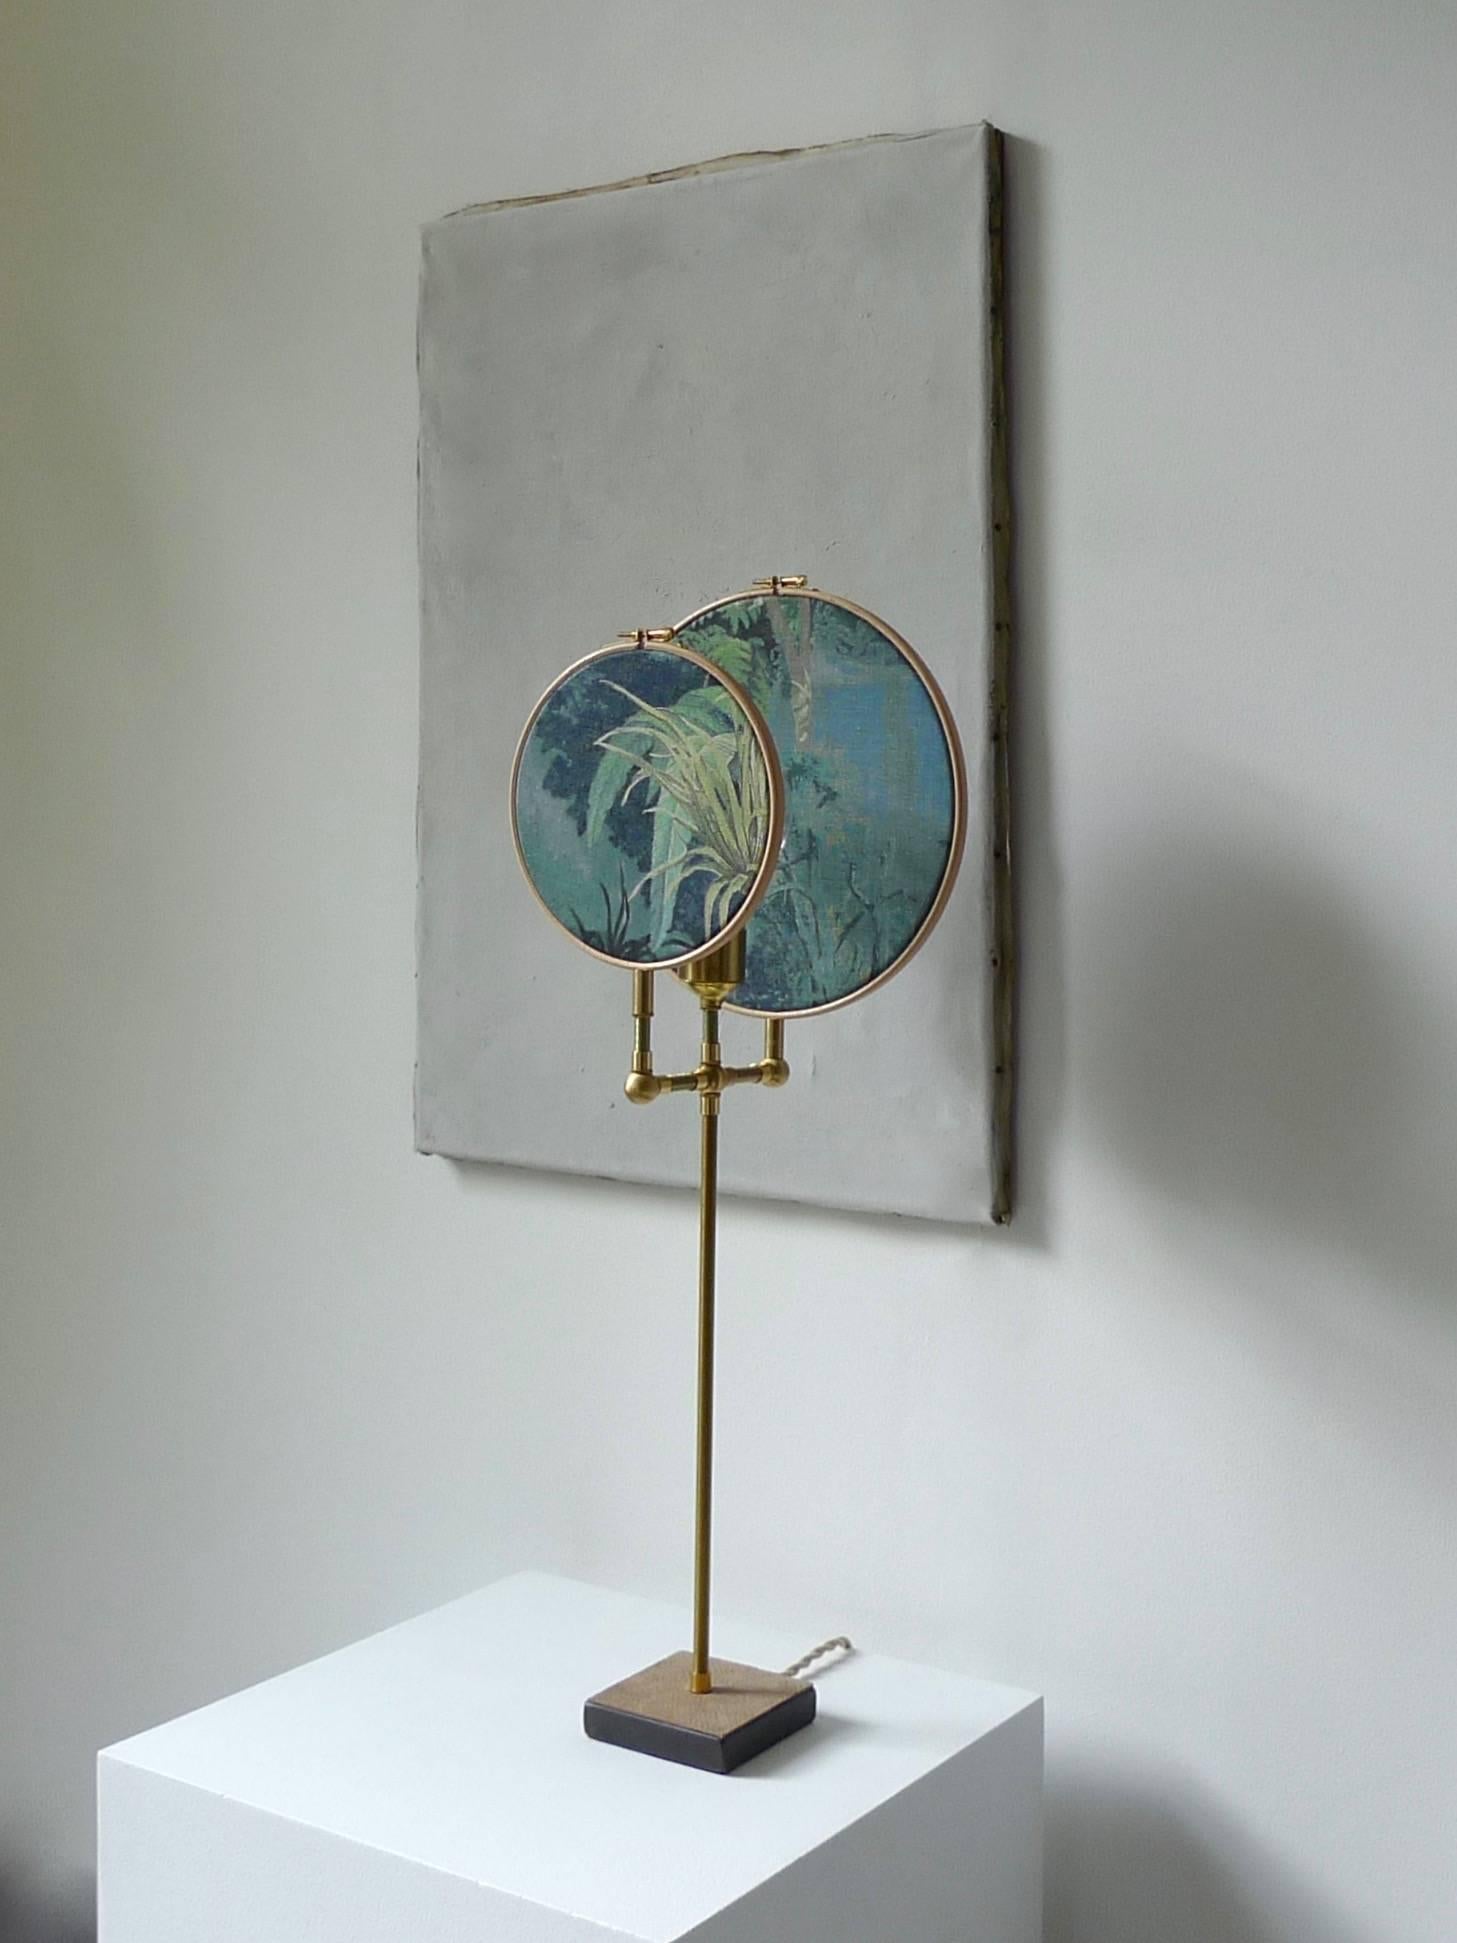 Light object, floor lamp, circle blue grey
Handmade in brass, leather, wood, hand printed and painted linen.
A dimmer is inlaid with leather
Dimensions: H 68 x W 27 x D 16 cm
The design artwork is meticulously handcrafted in a limited series,